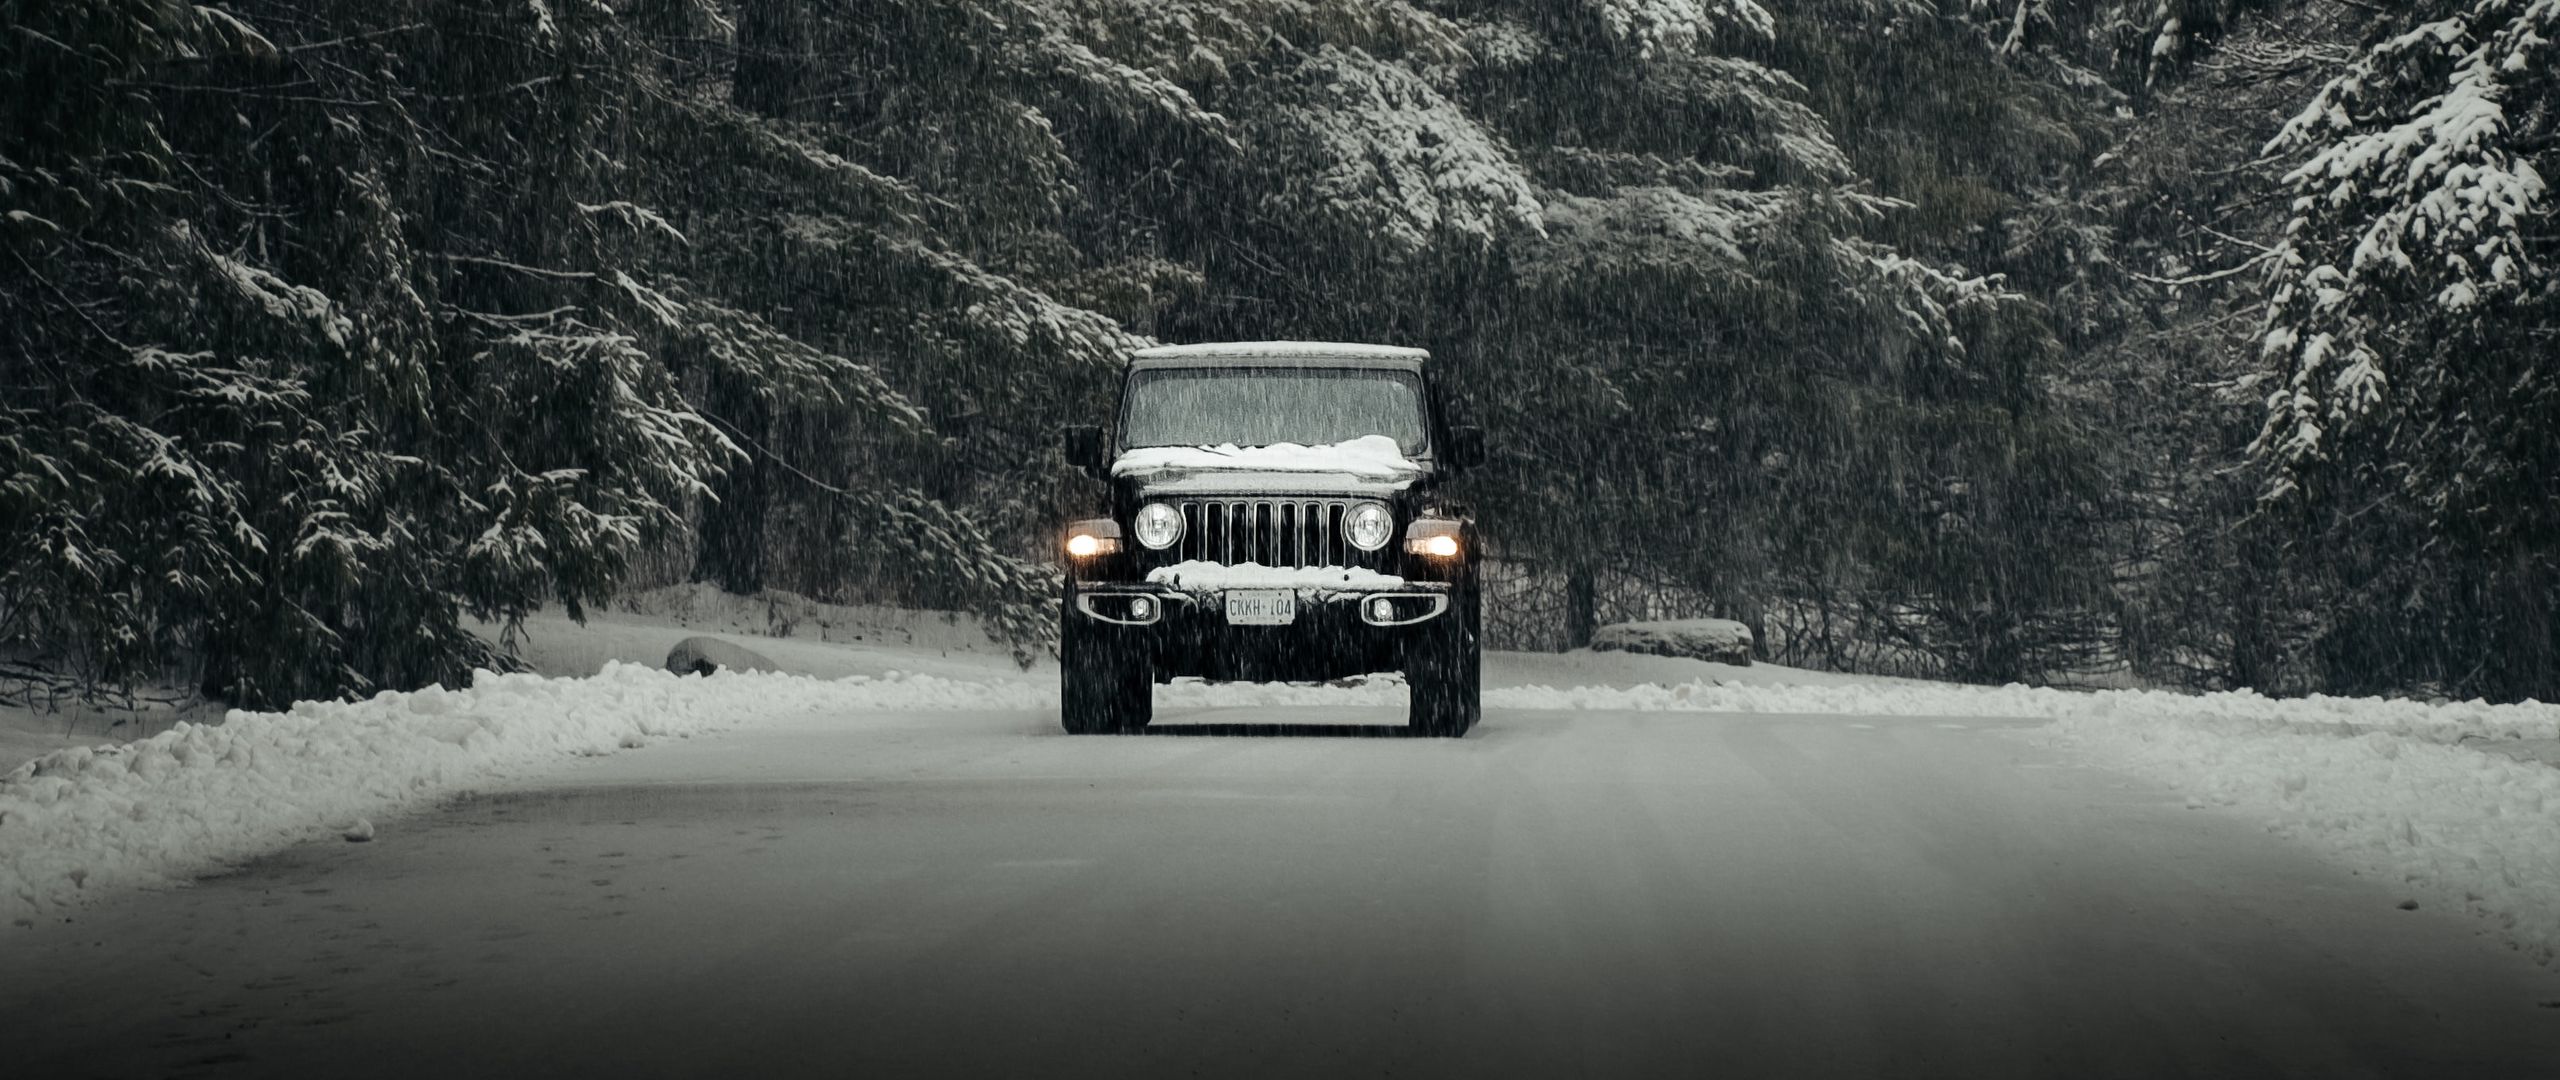 Download wallpaper 2560x1080 jeep wrangler, jeep, car, suv, black, snow,  road dual wide 1080p hd background